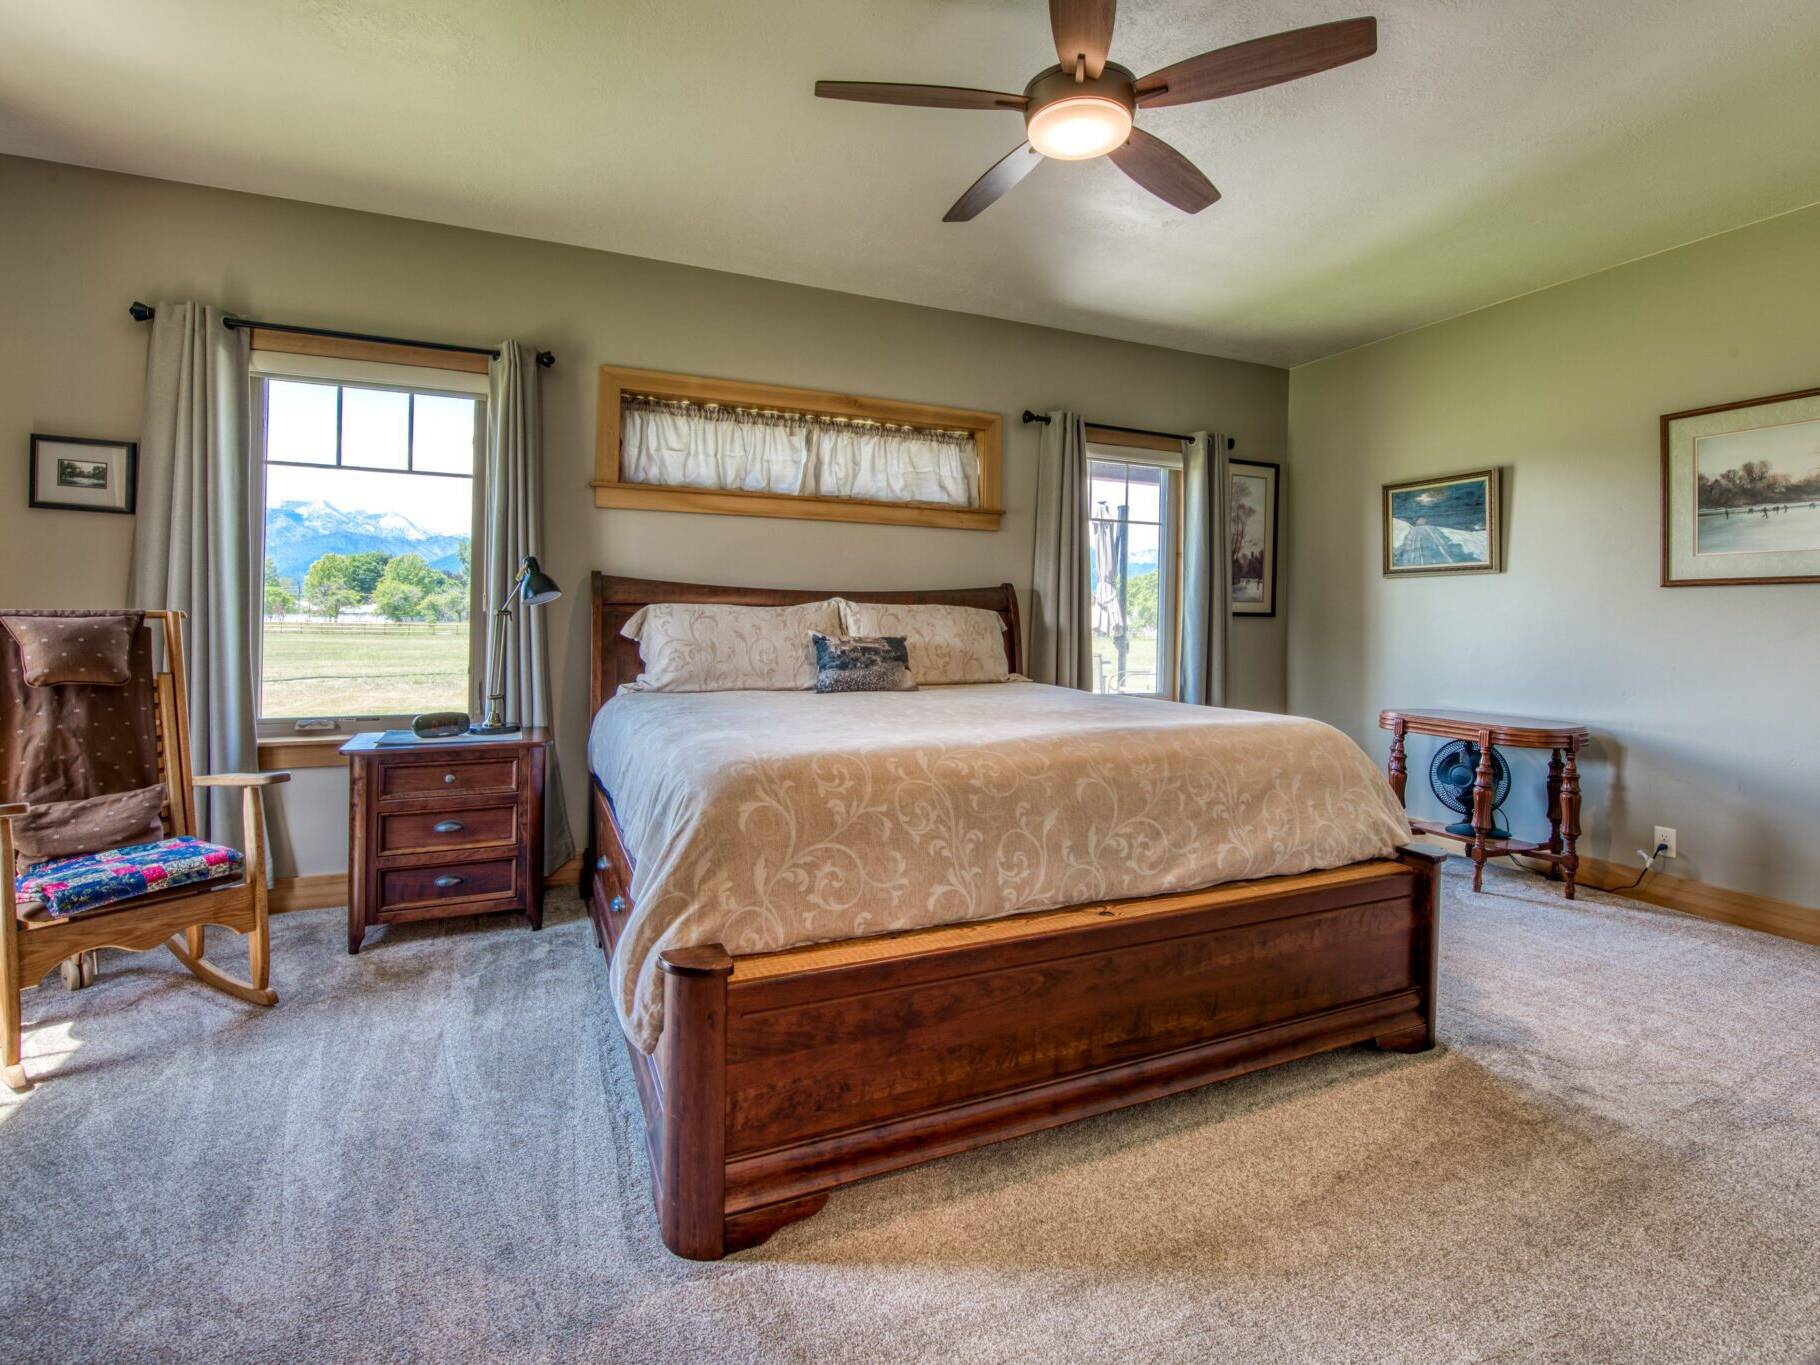 Master bedroom with carpet flooring, wood trim and doors in a custom home near Hamilton, MT.